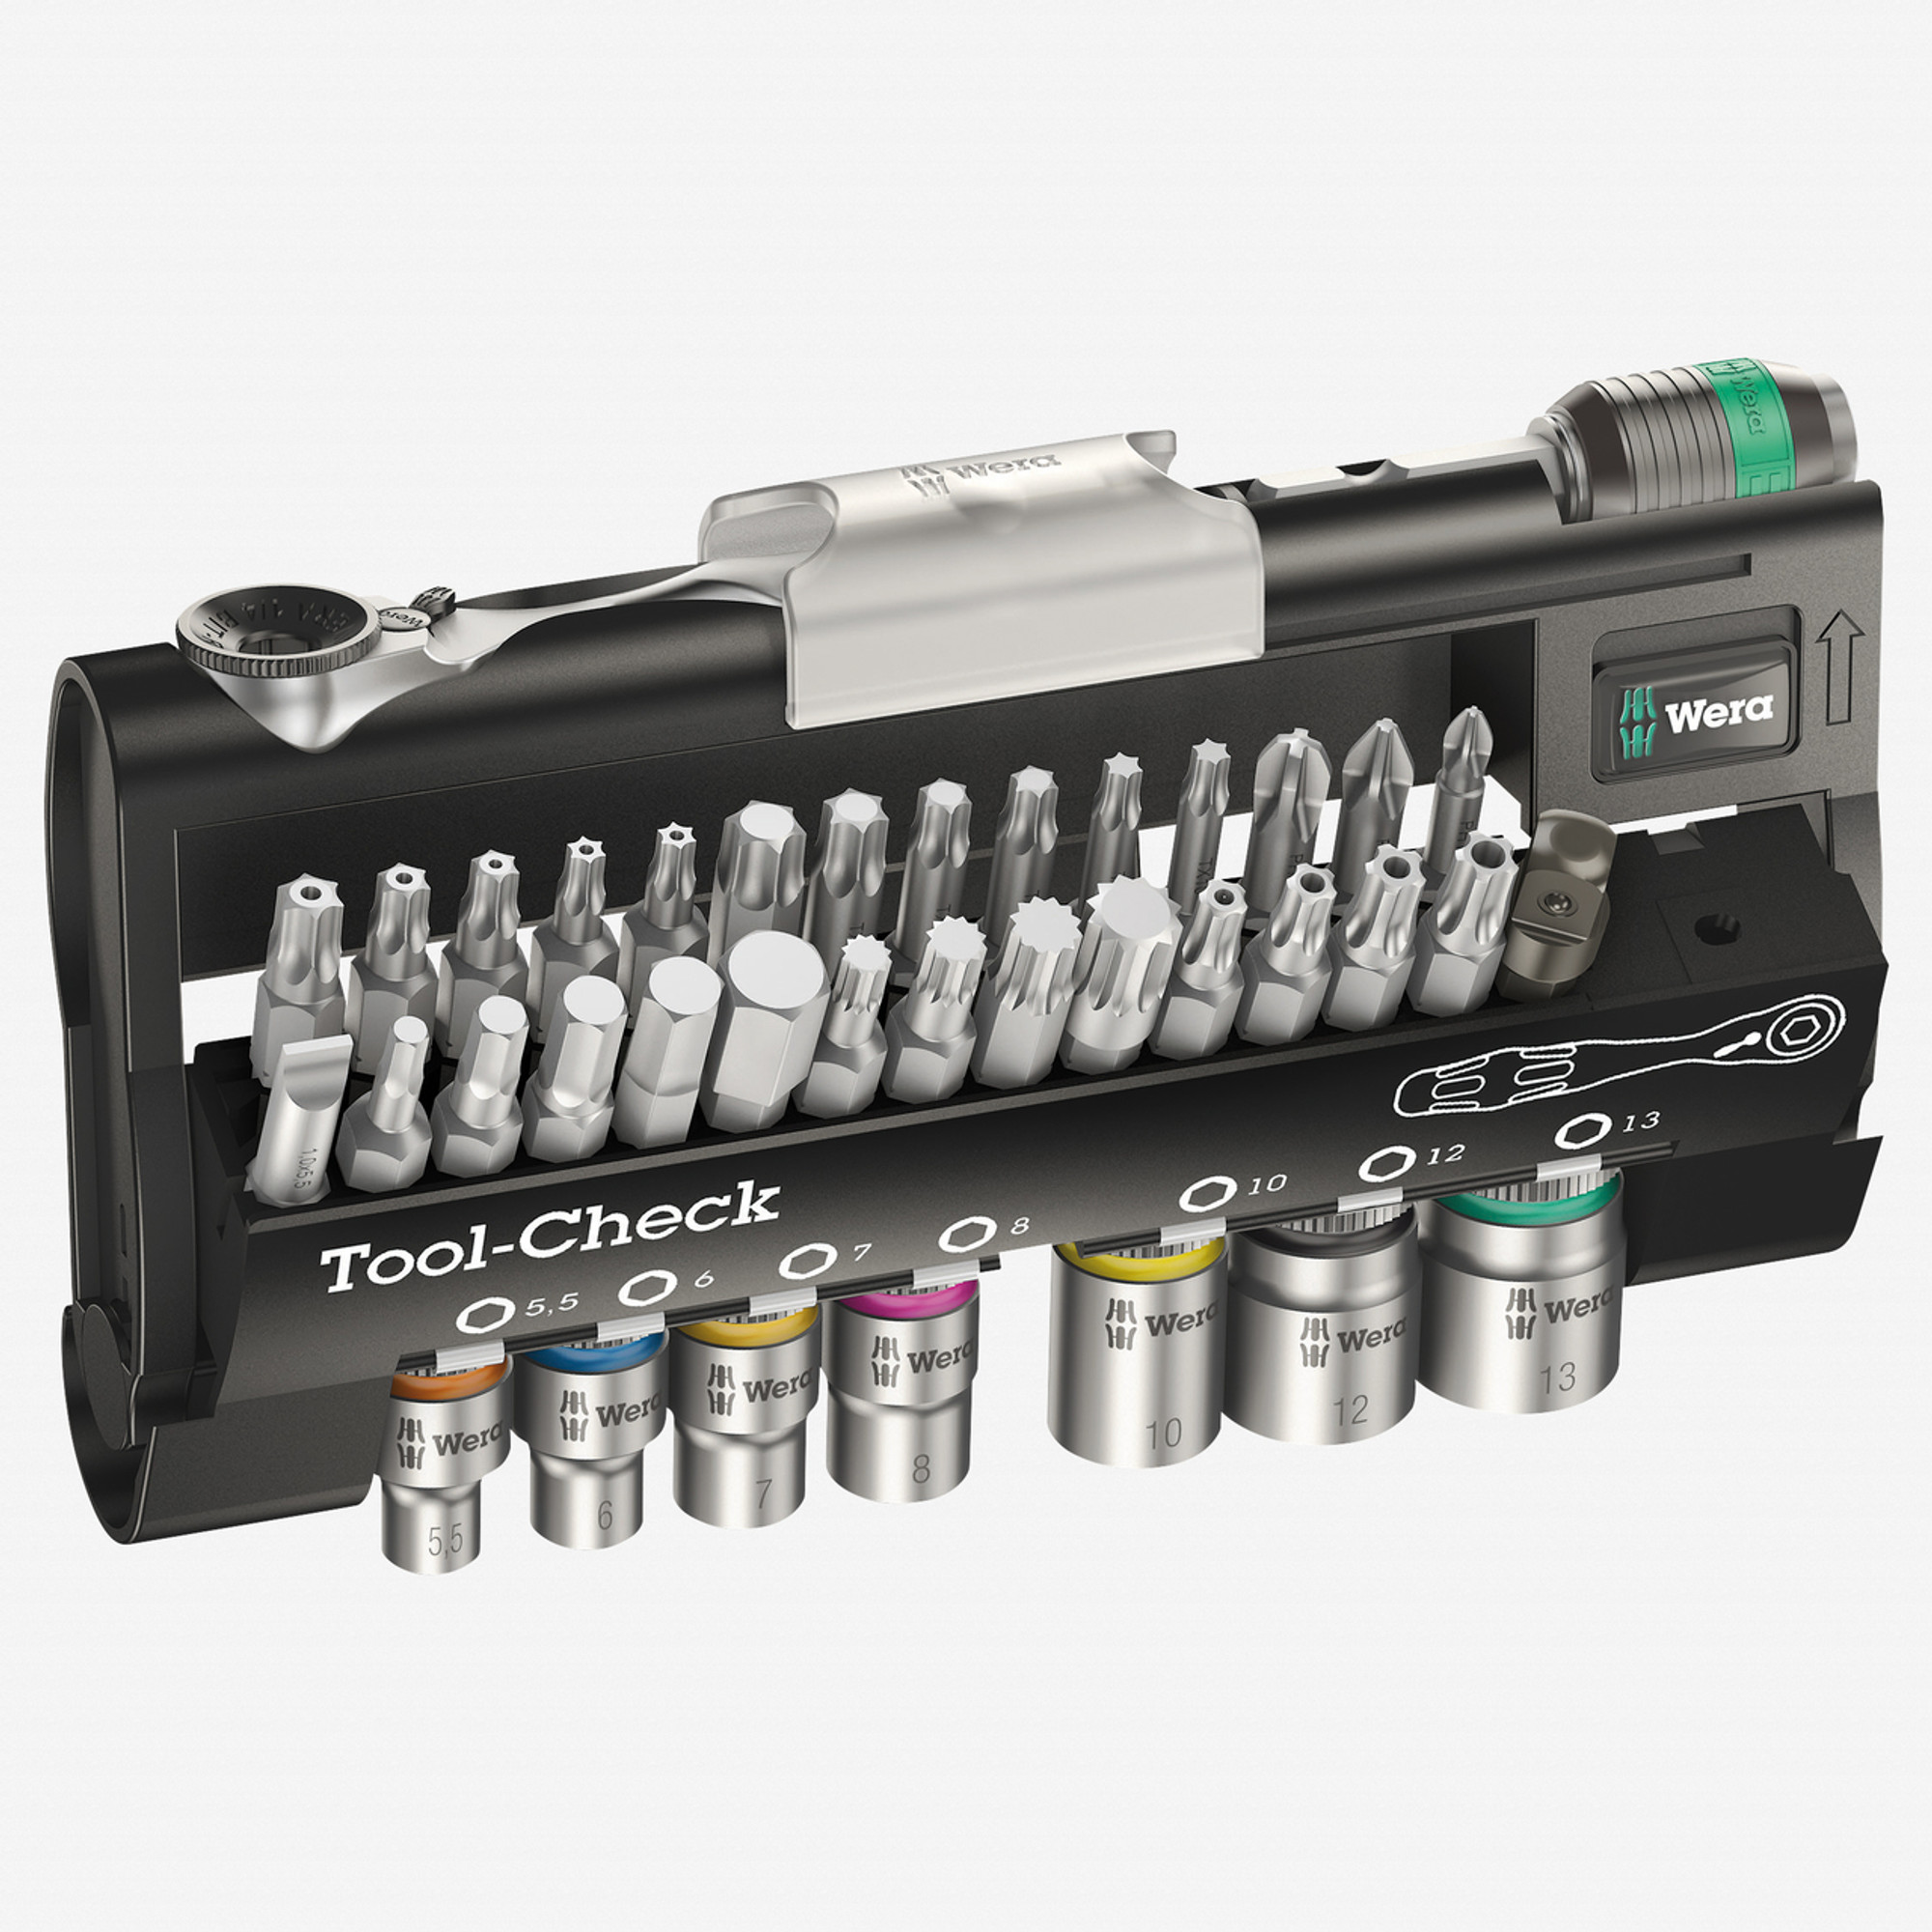 Oh, that's handy - Wera Tool-Check PLUS - NotEnoughTech